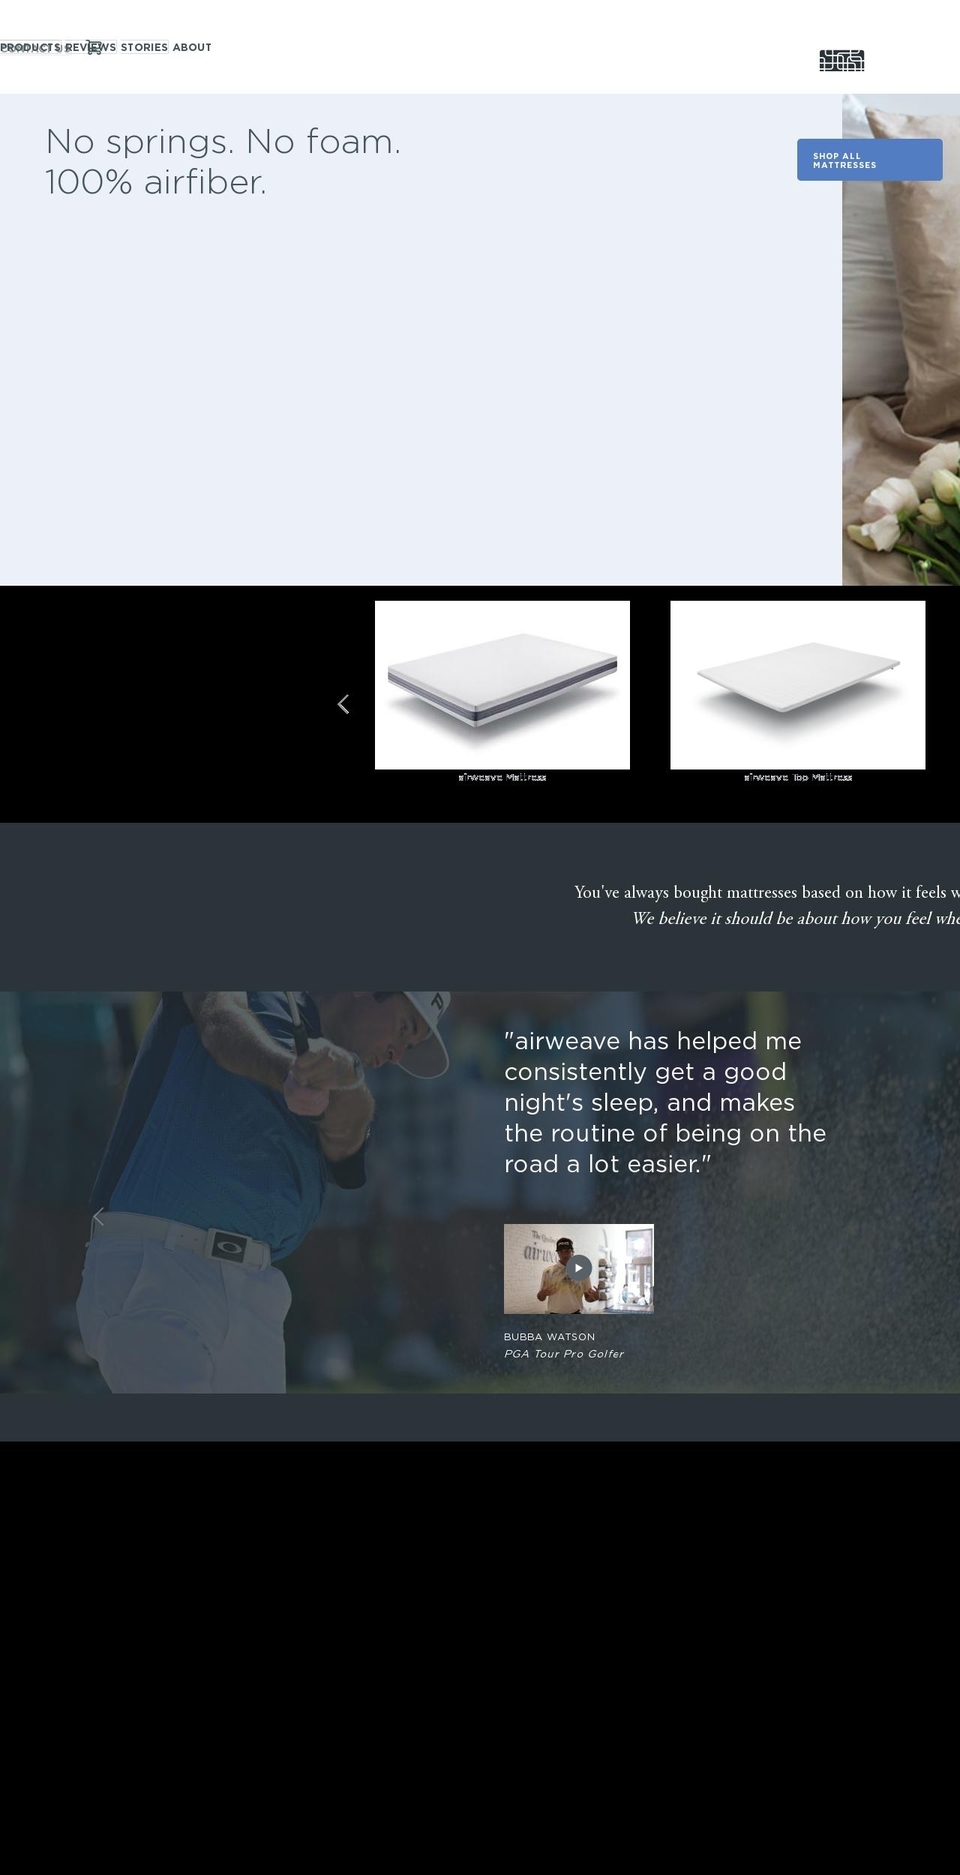 Motion Shopify theme site example airweave.com